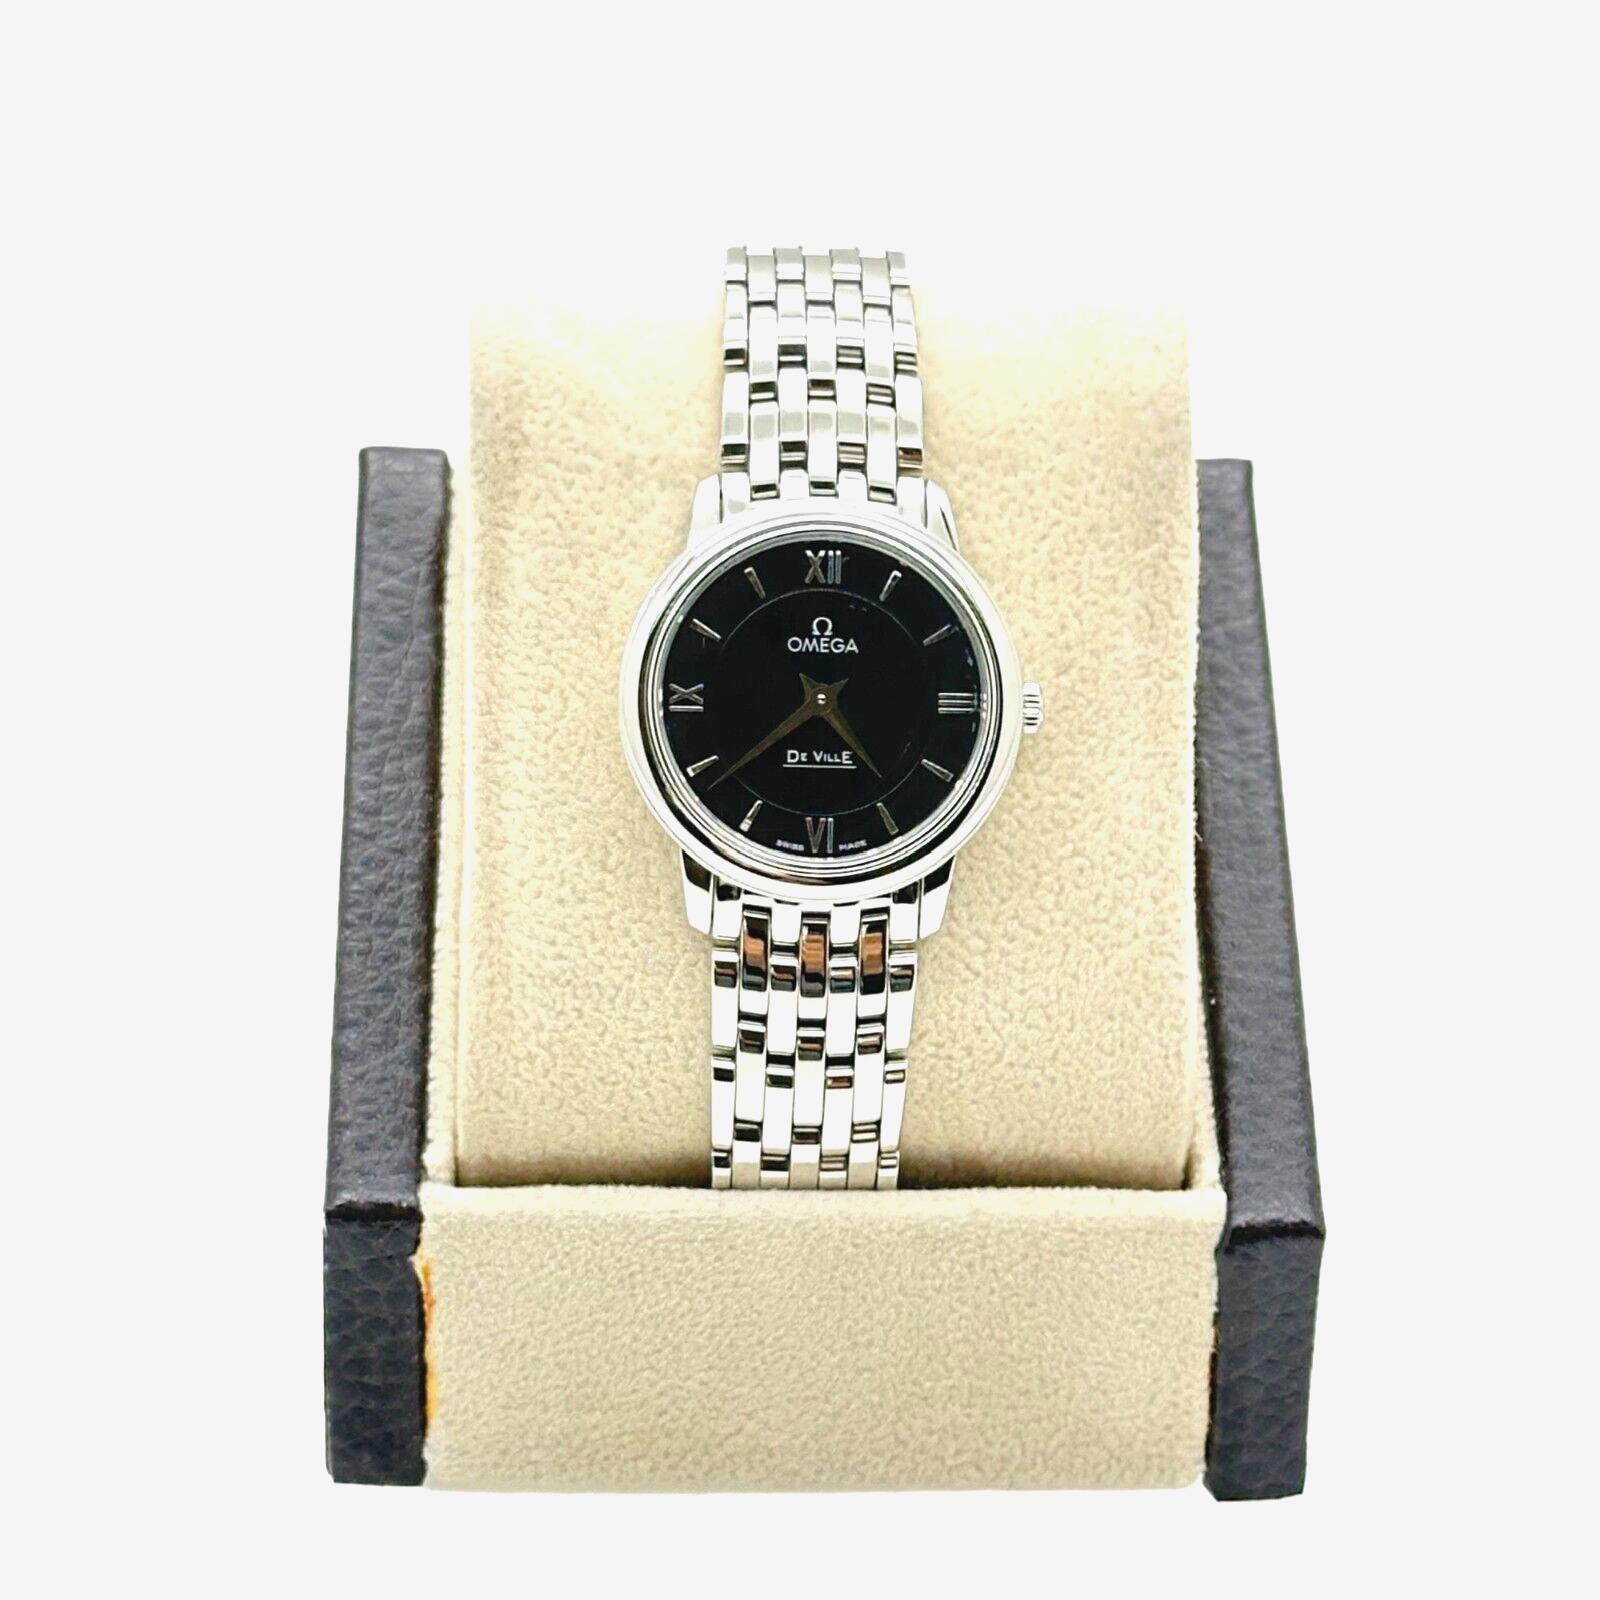 
Style Number: 424.10.27.60.01.001

Model: DeVille Prestige 

Case Material: Stainless Steel 

Band: Stainless Steel 

Bezel:  Stainless Steel 

Dial: Black

Face: Sapphire Crystal 

Case Size: 24.4mm

Includes: 

-Omega Box and Paper

-Certified